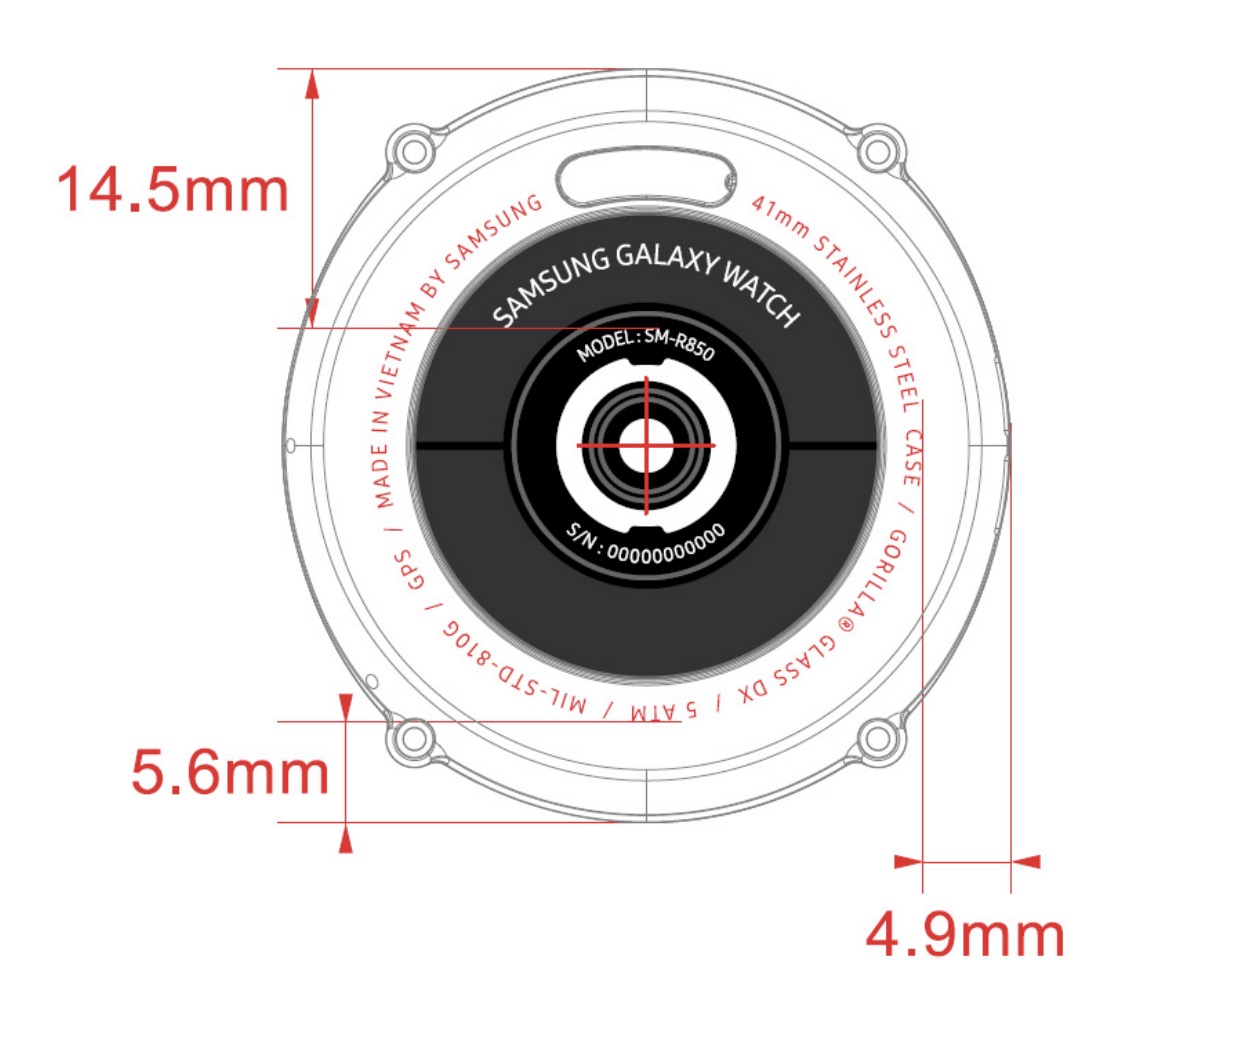 Samsung Galaxy Watch Samsung Galaxy Watch 2 Tipped To Launch Soon With Physical Rotating Bezel